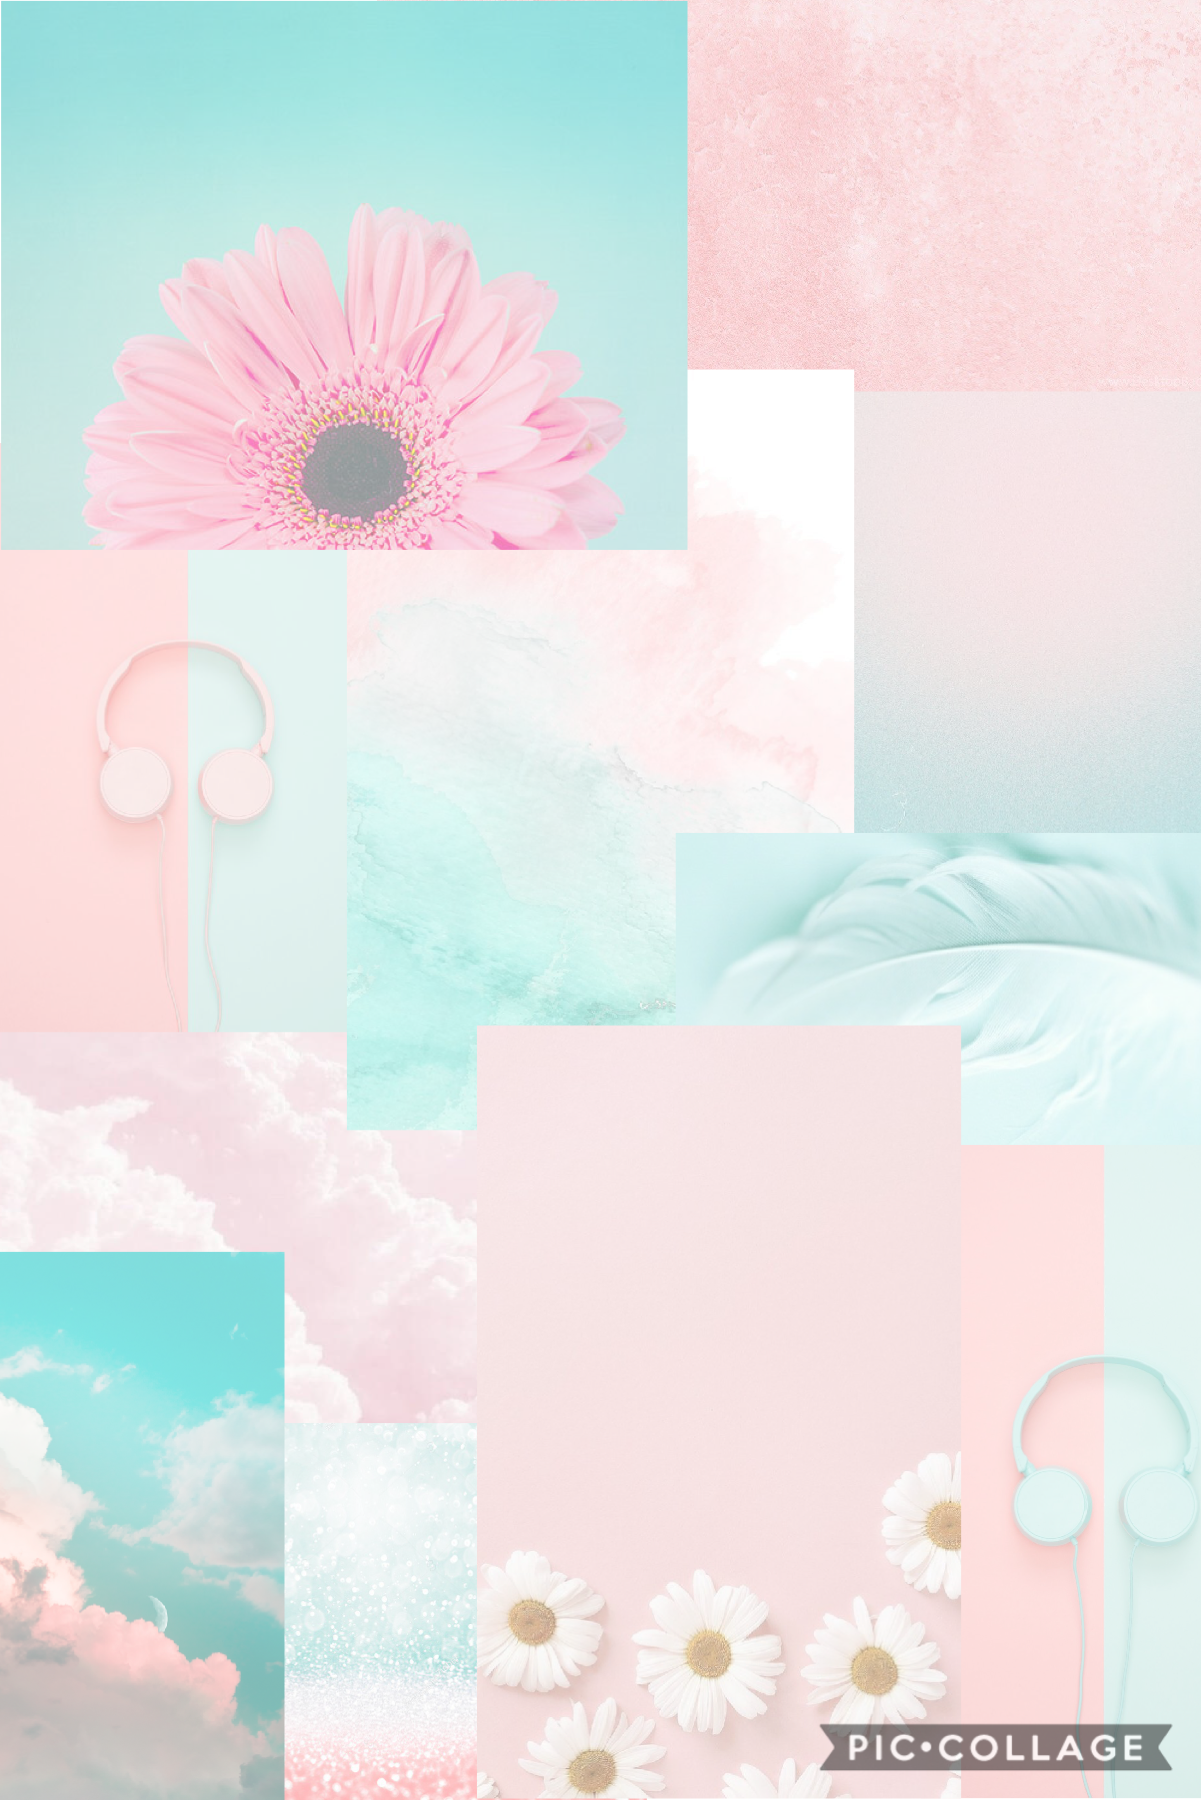 Teal and pink backgrounds 